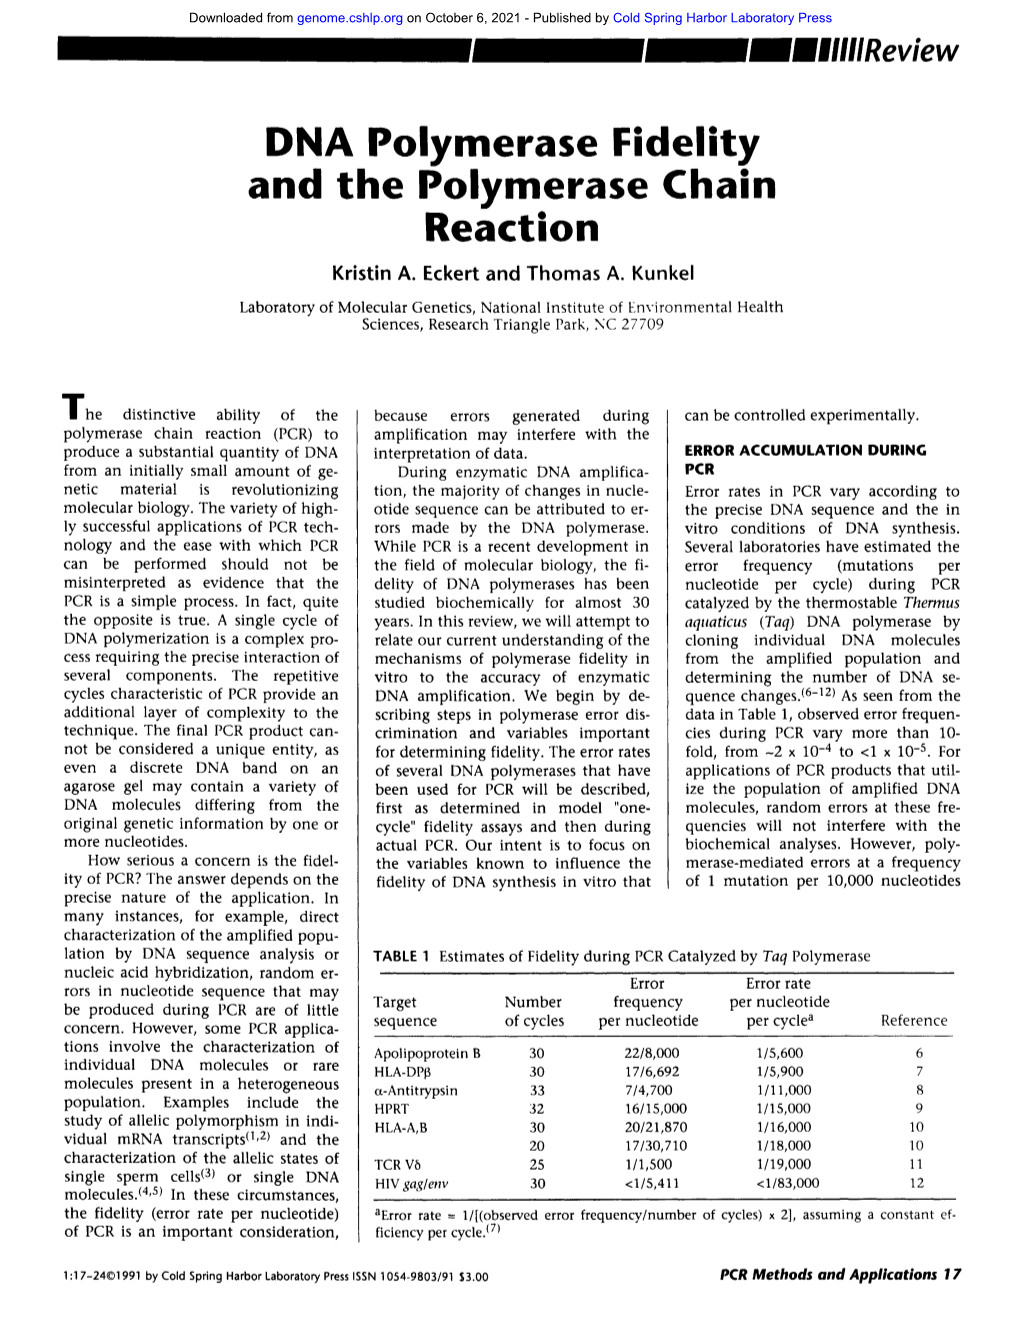 DNA Polymerase Fidelity and the Polymerase Chain Reaction Kristin A